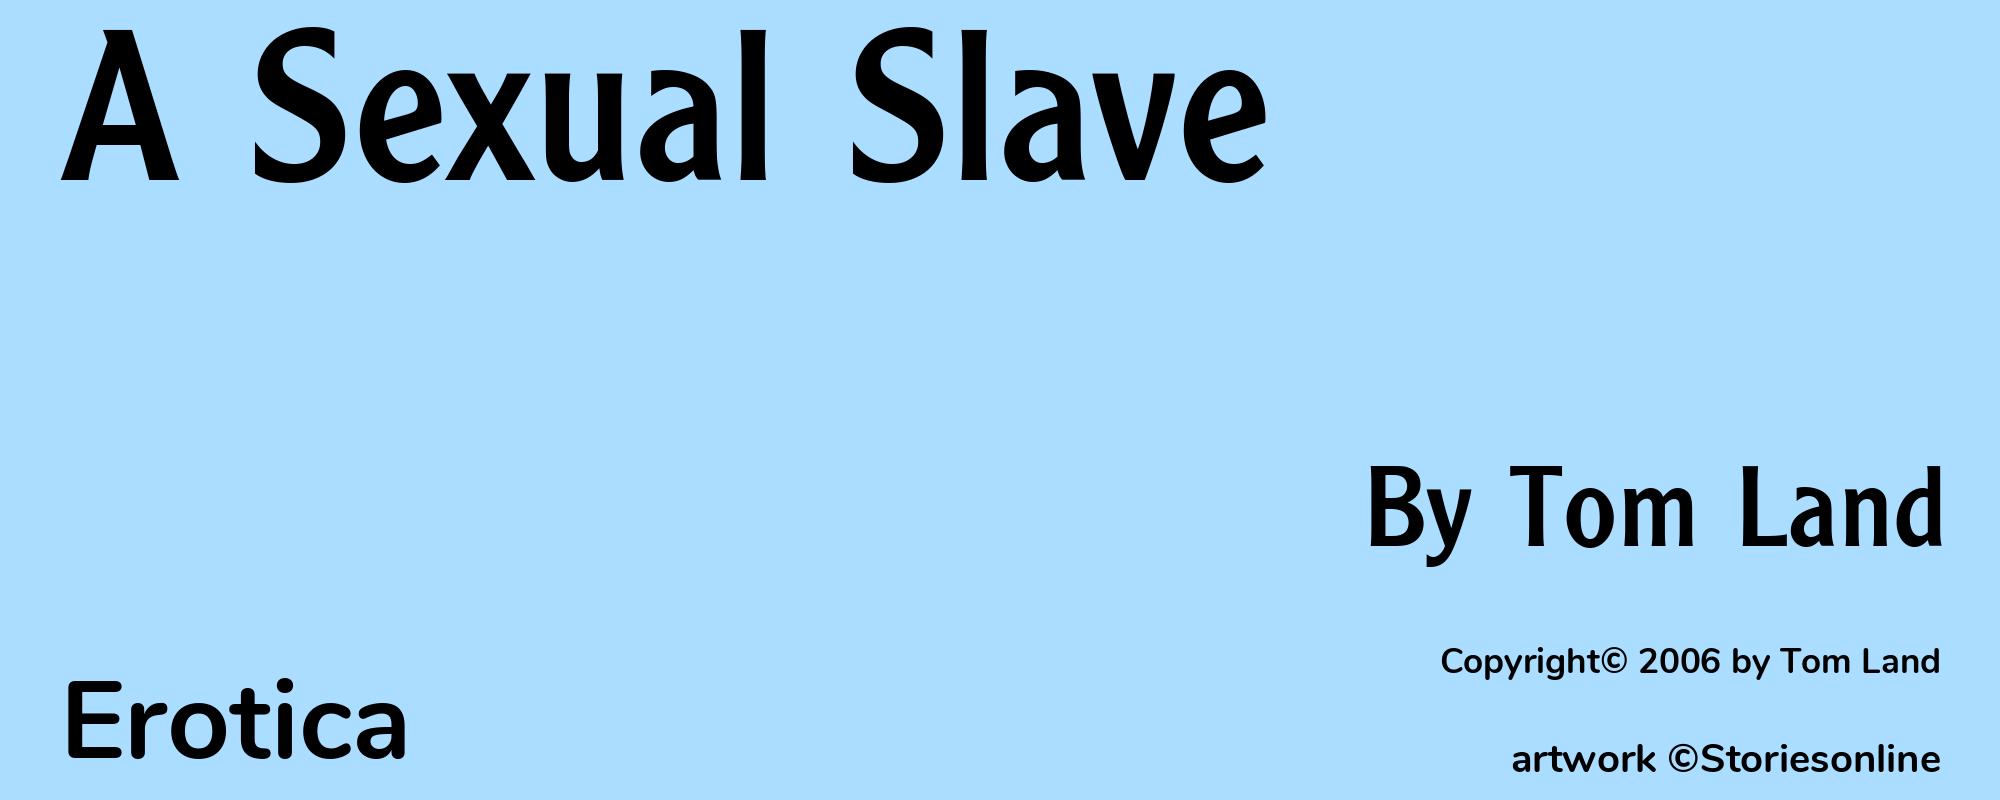 A Sexual Slave - Cover